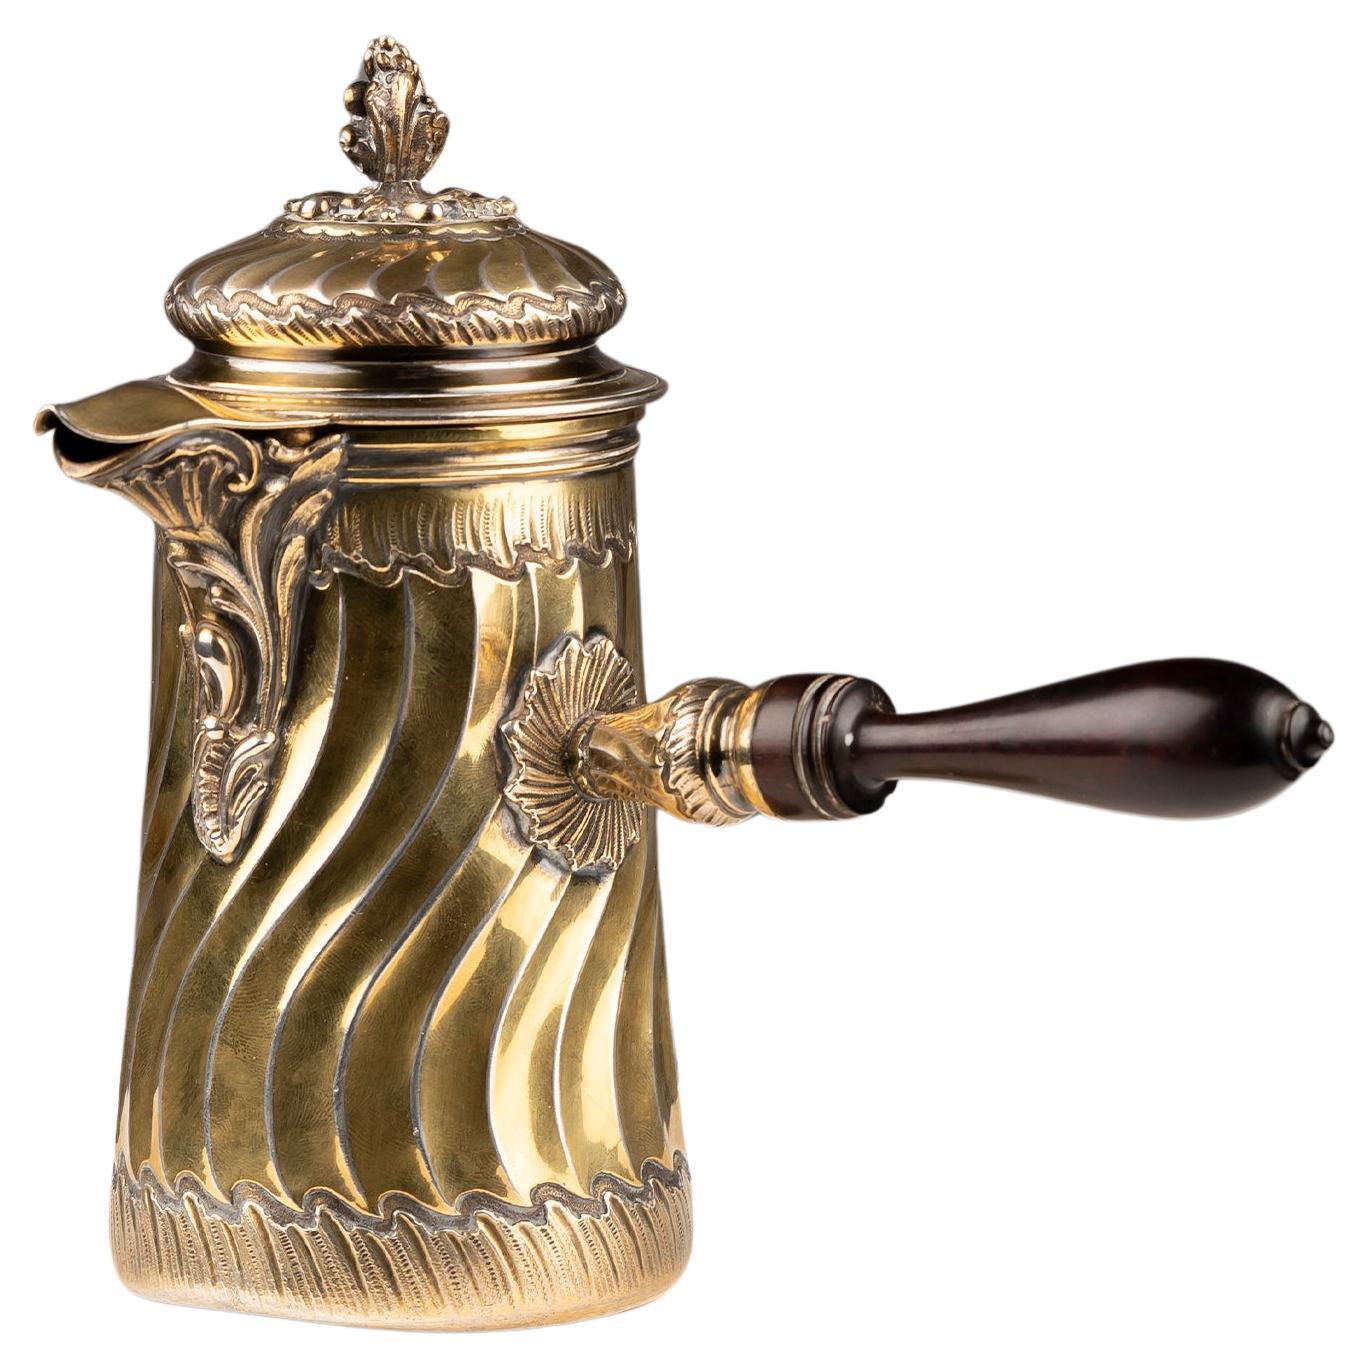 Small French Silver-Gilt Chocolate Pot by Boin-Taburet, 1880s For Sale